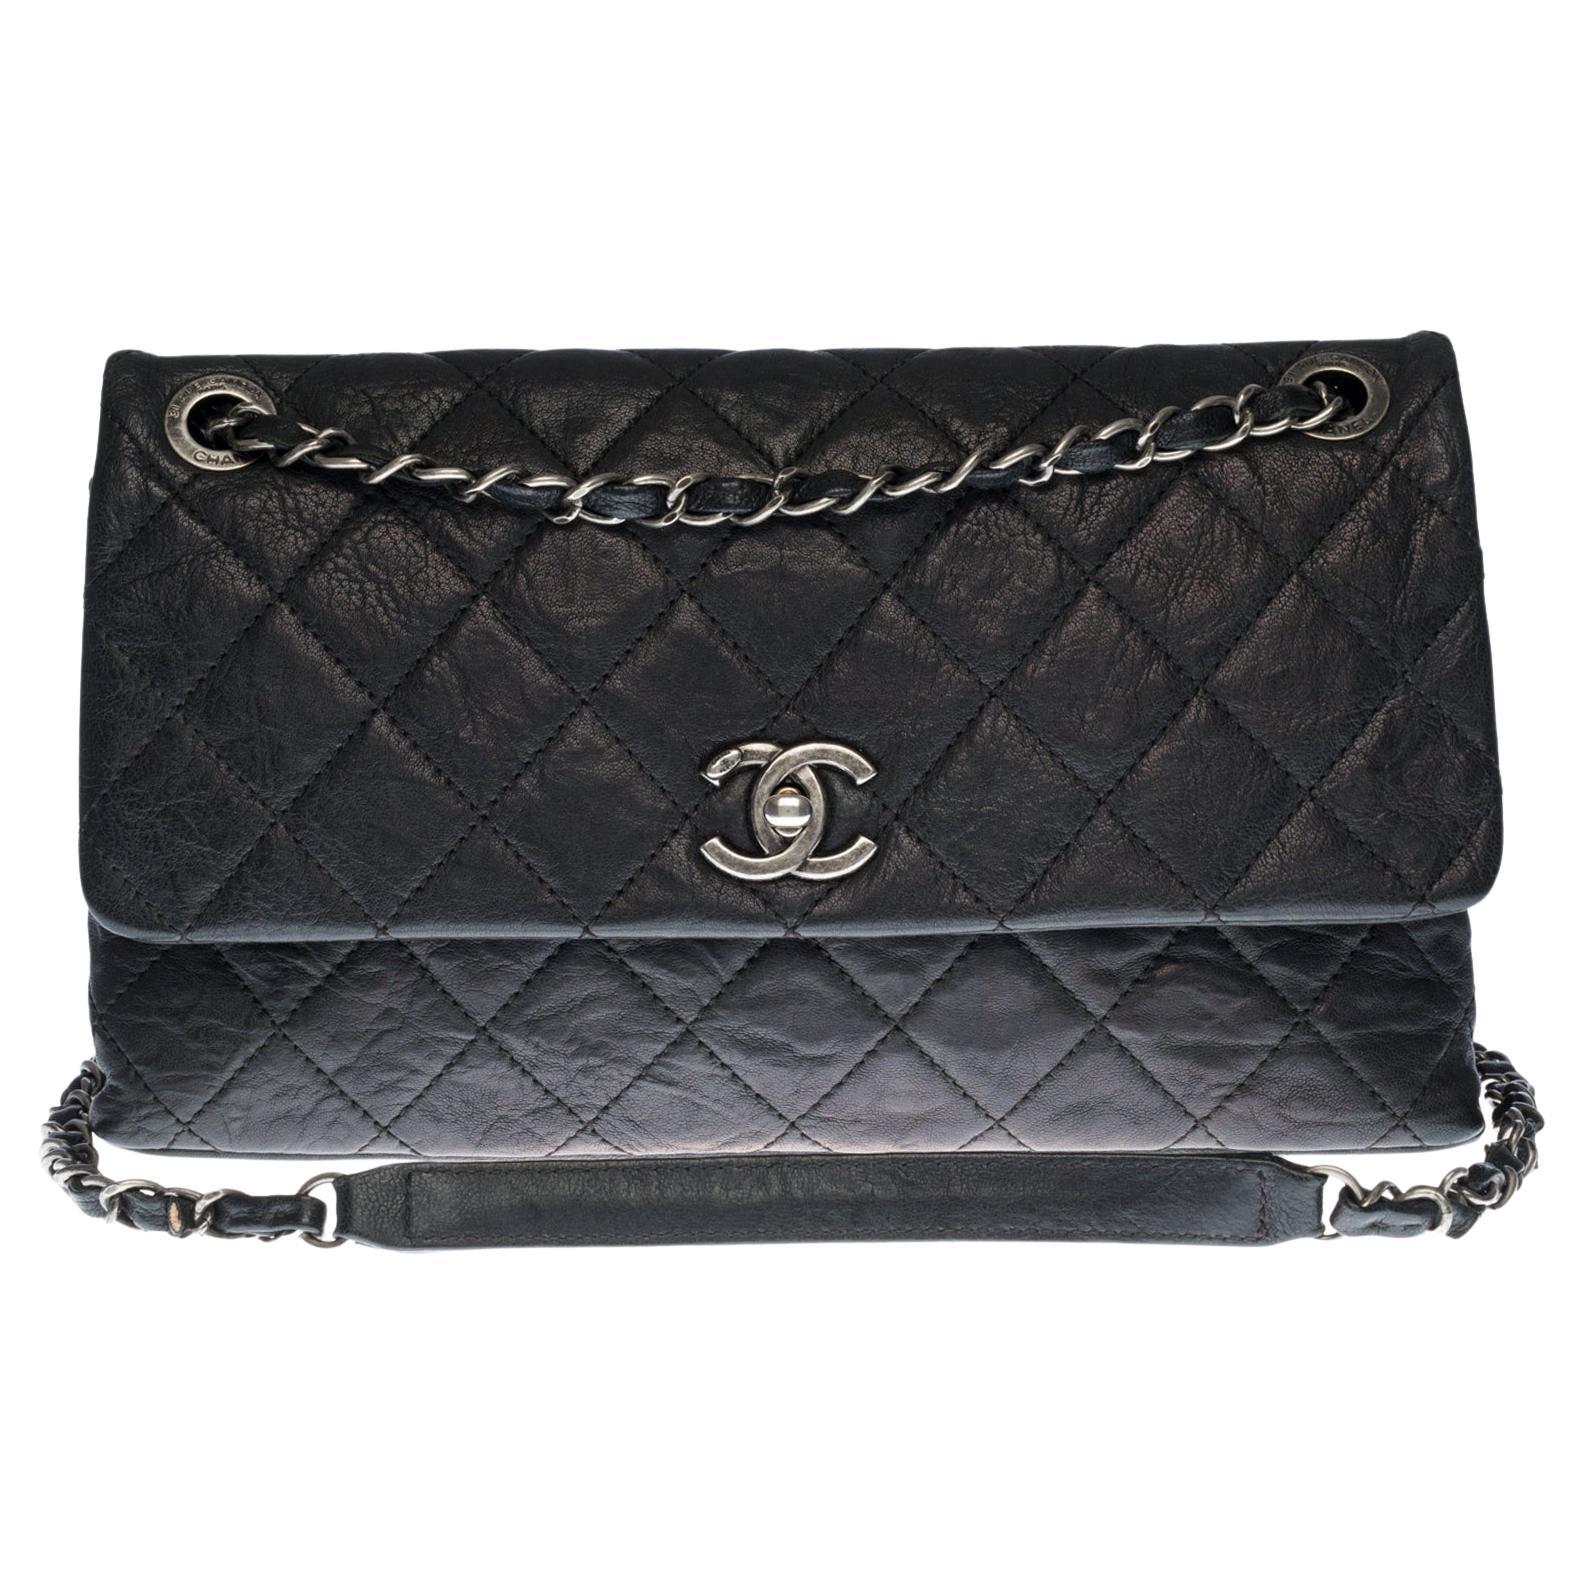 Chanel Classic shoulder Flap bag in black quilted leather and silver hardware